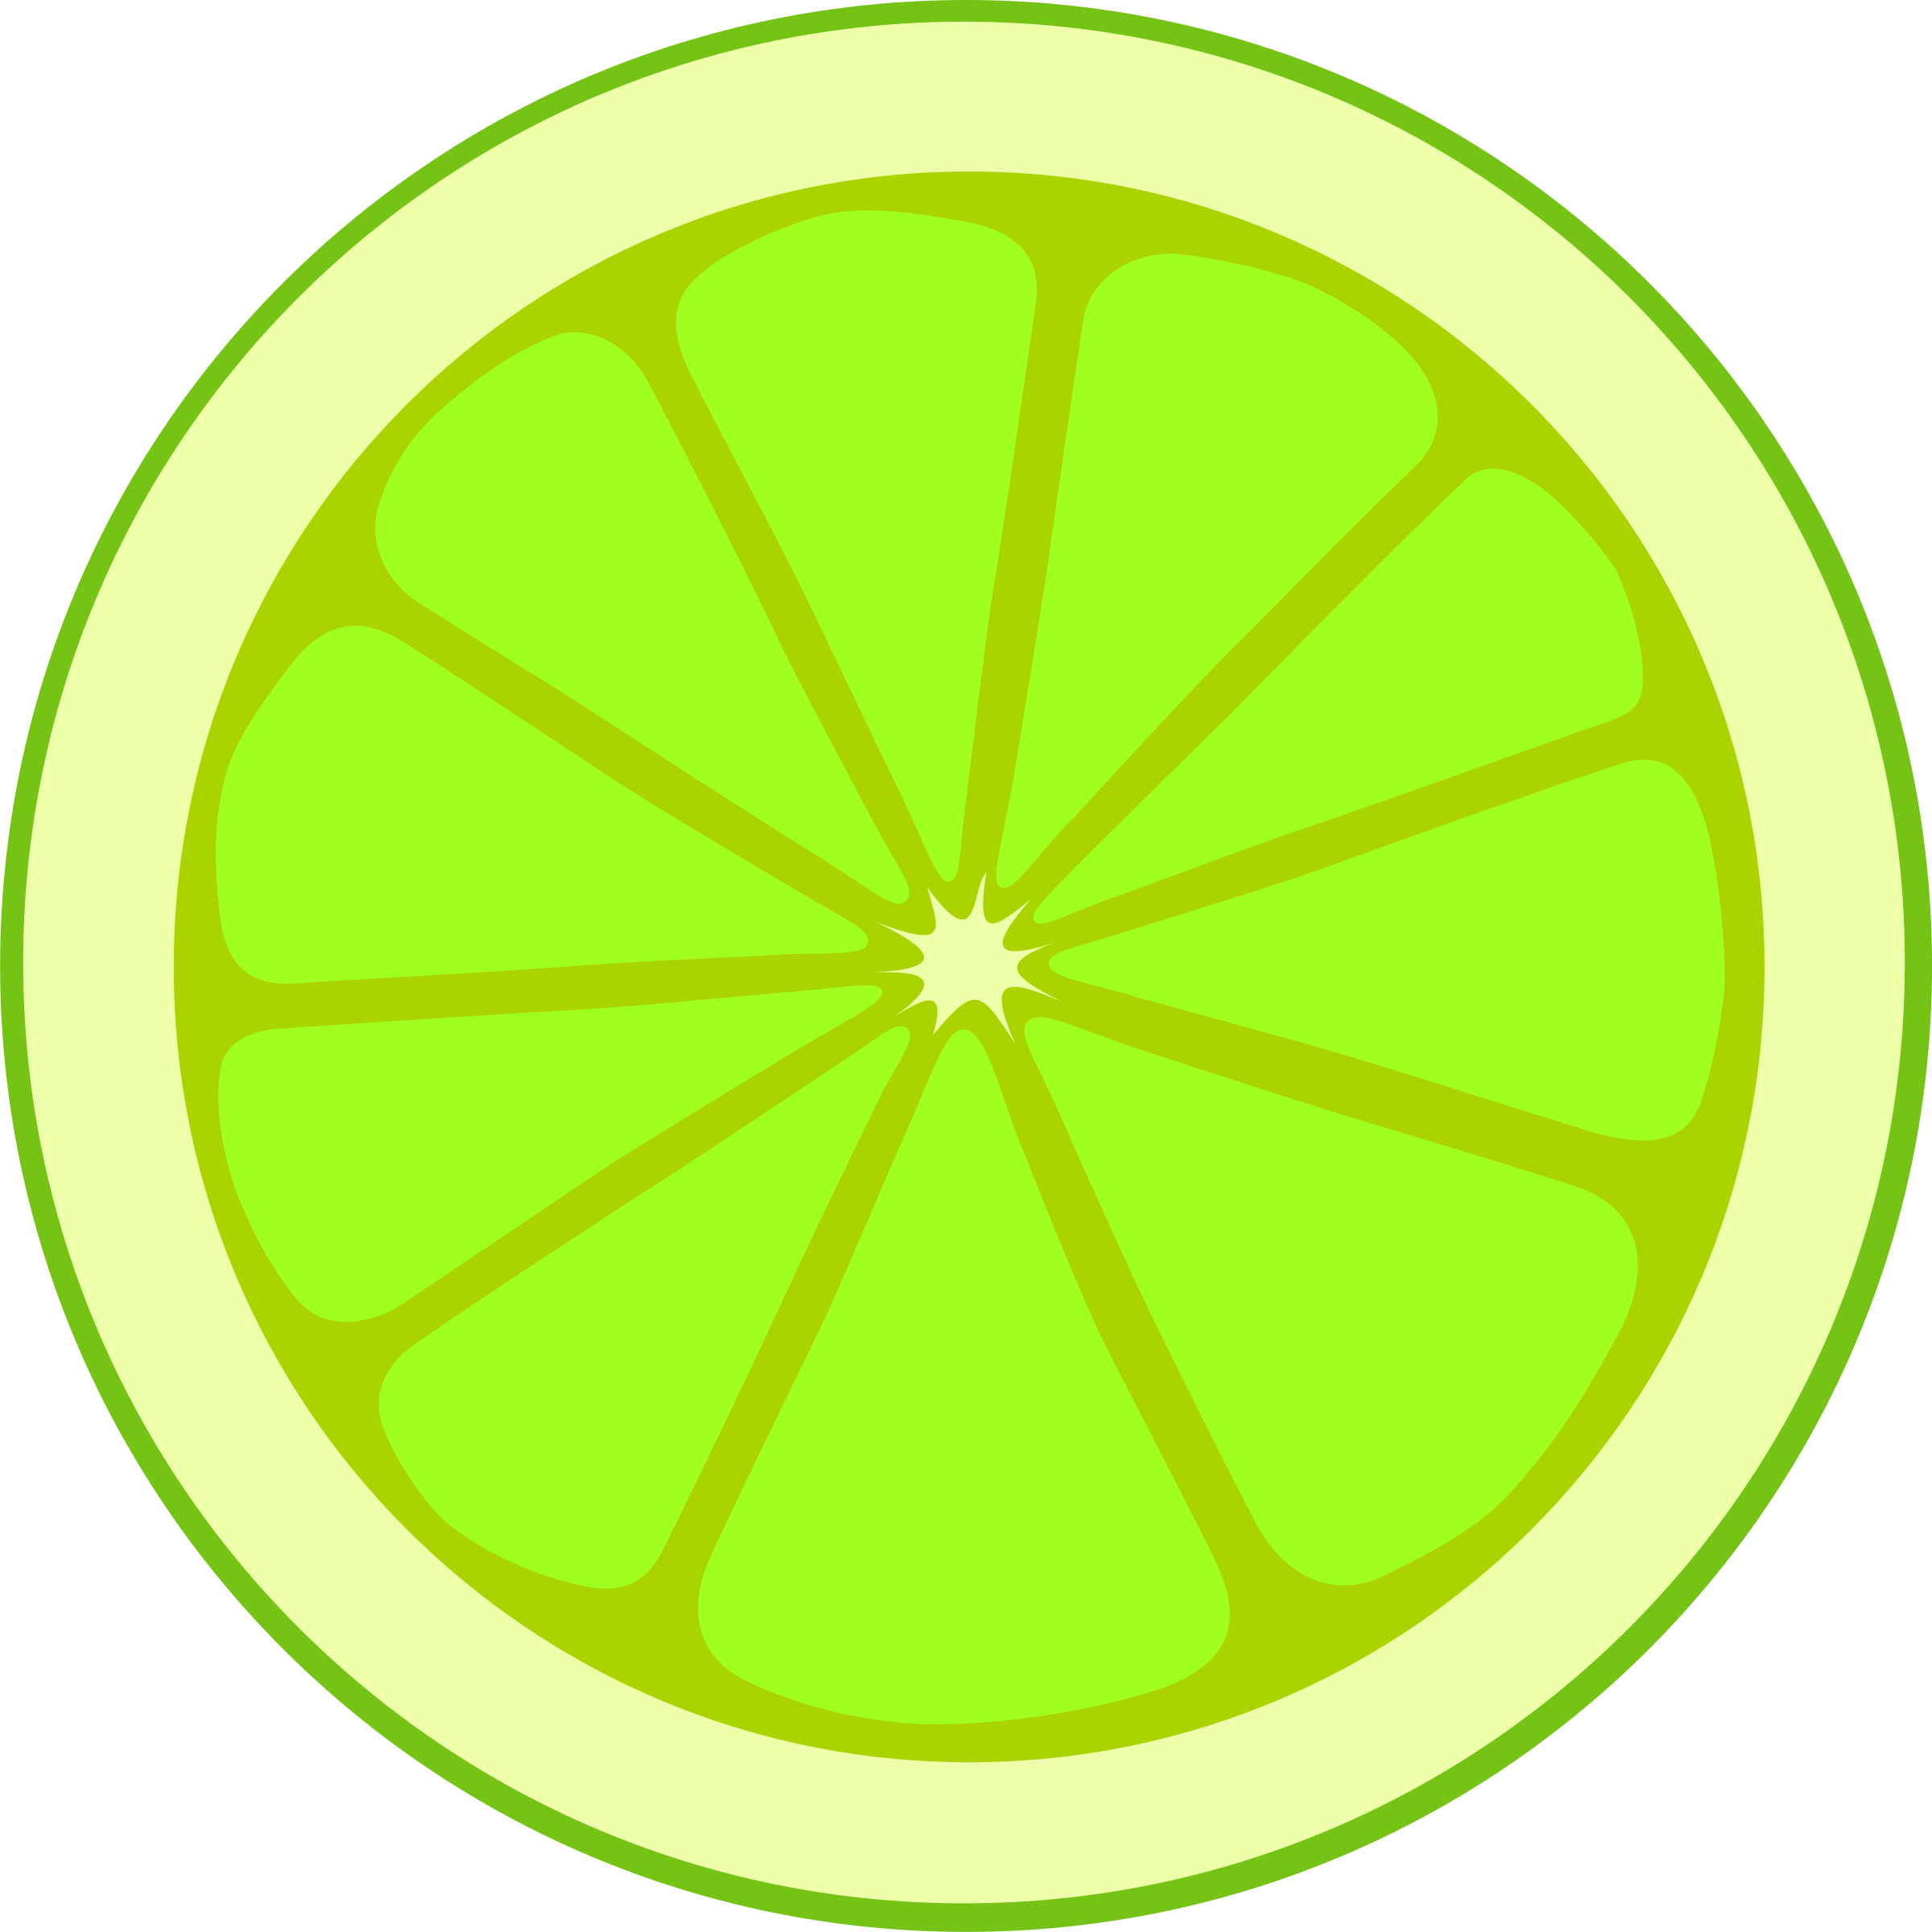 Lime clipart yellow. Simple section big image